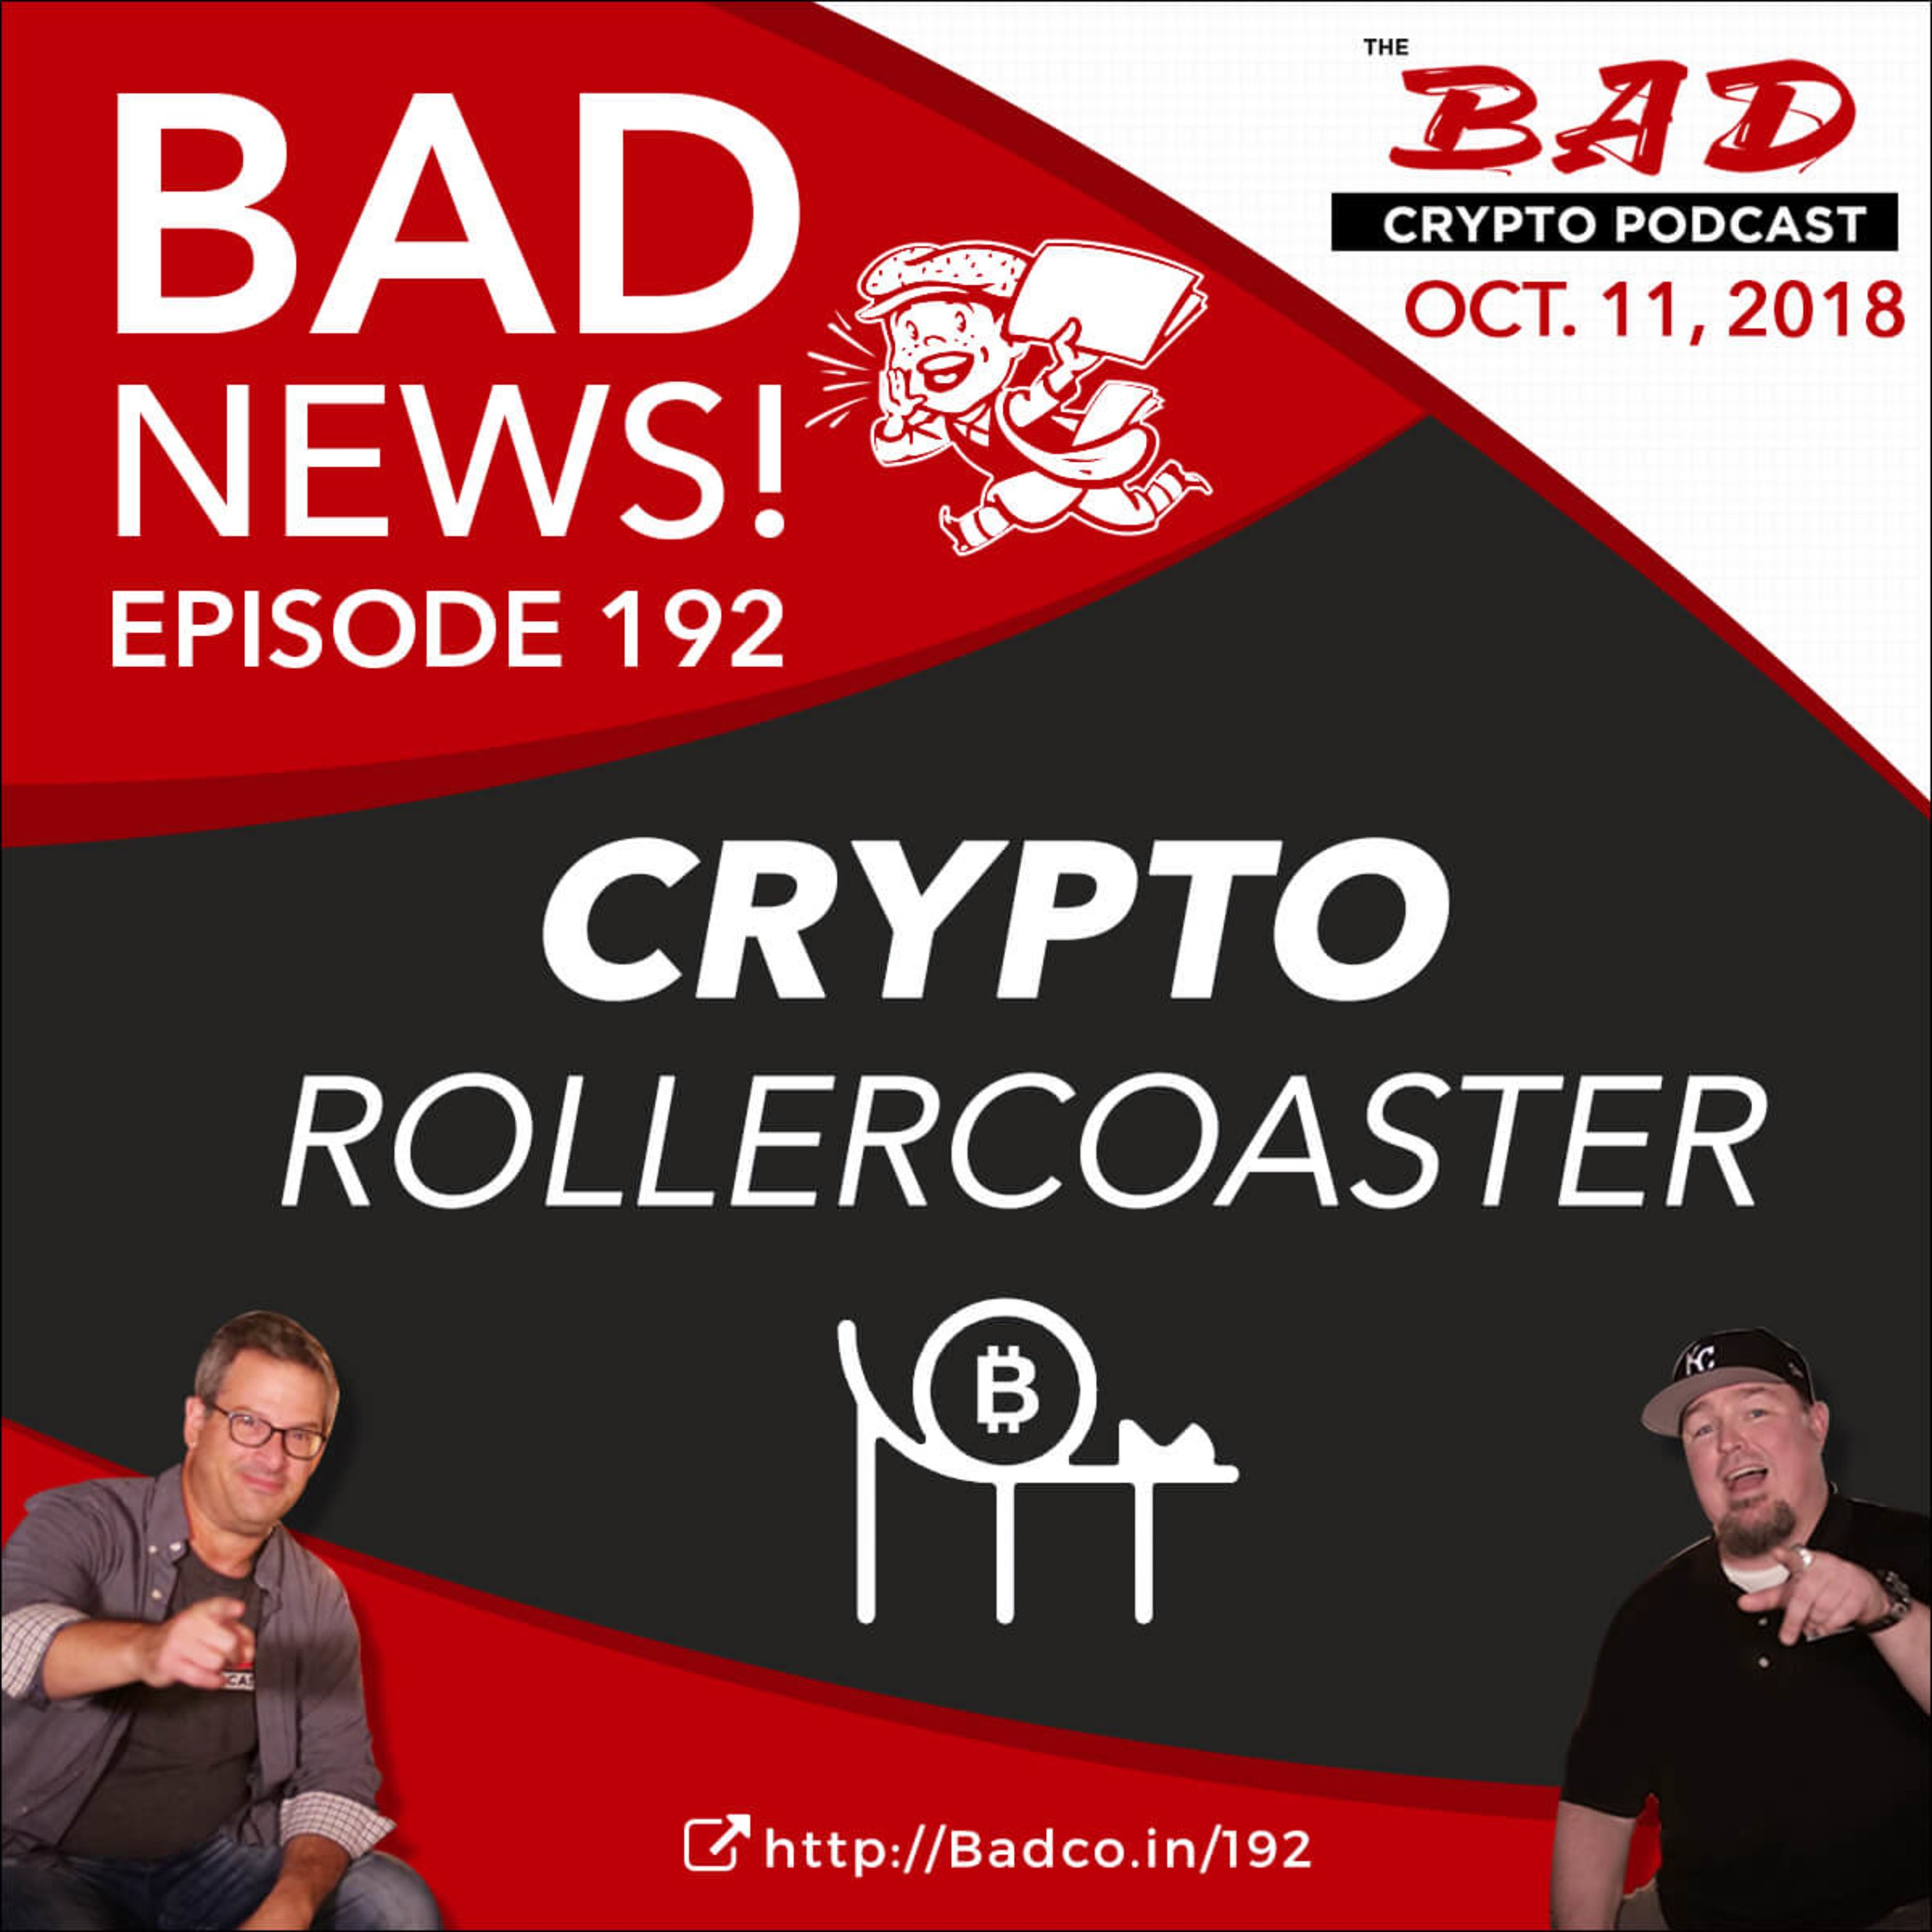 Crypto Rollercoaster - Bad News for 10/11/18